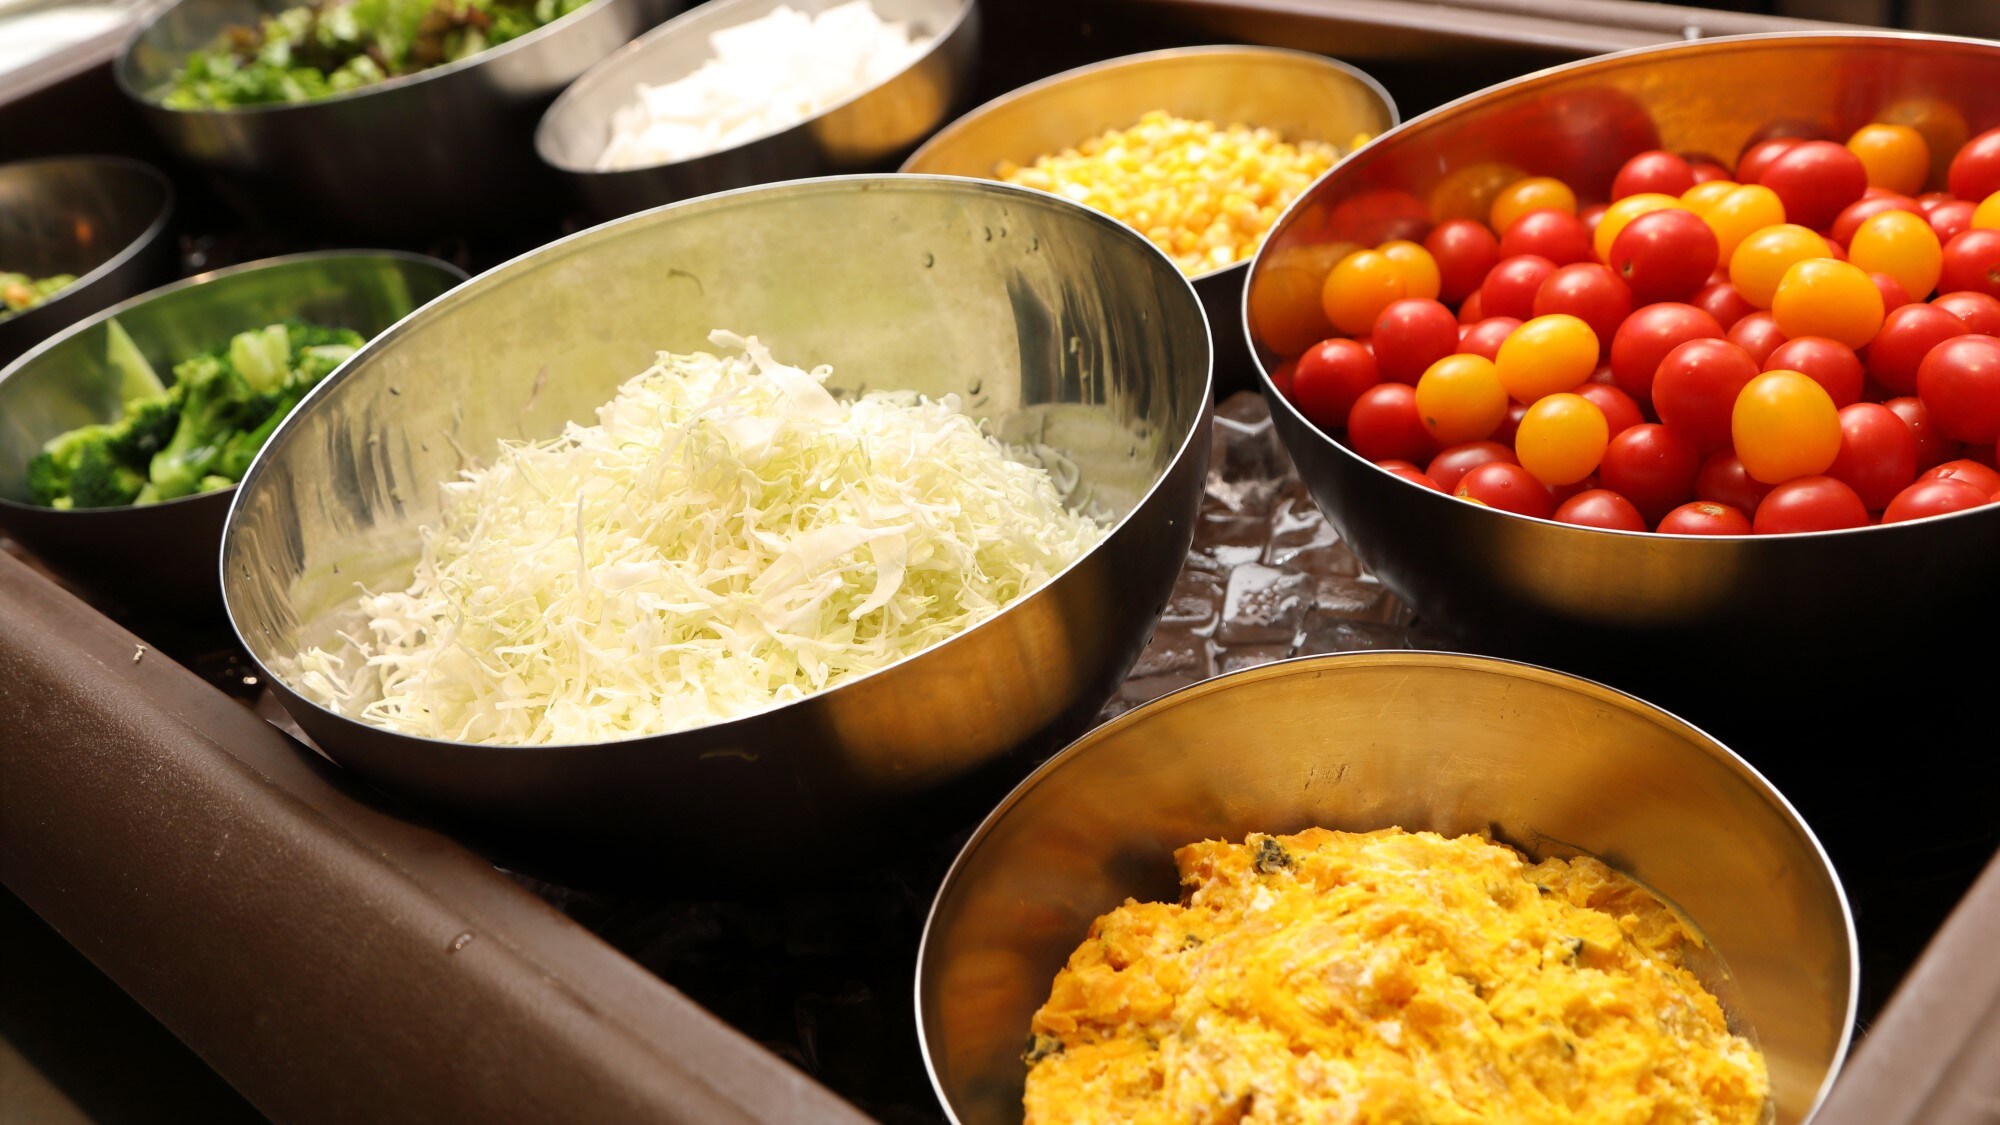 Breakfast buffet example! Colorful fresh vegetables. Make your own salad with dressings and toppings★